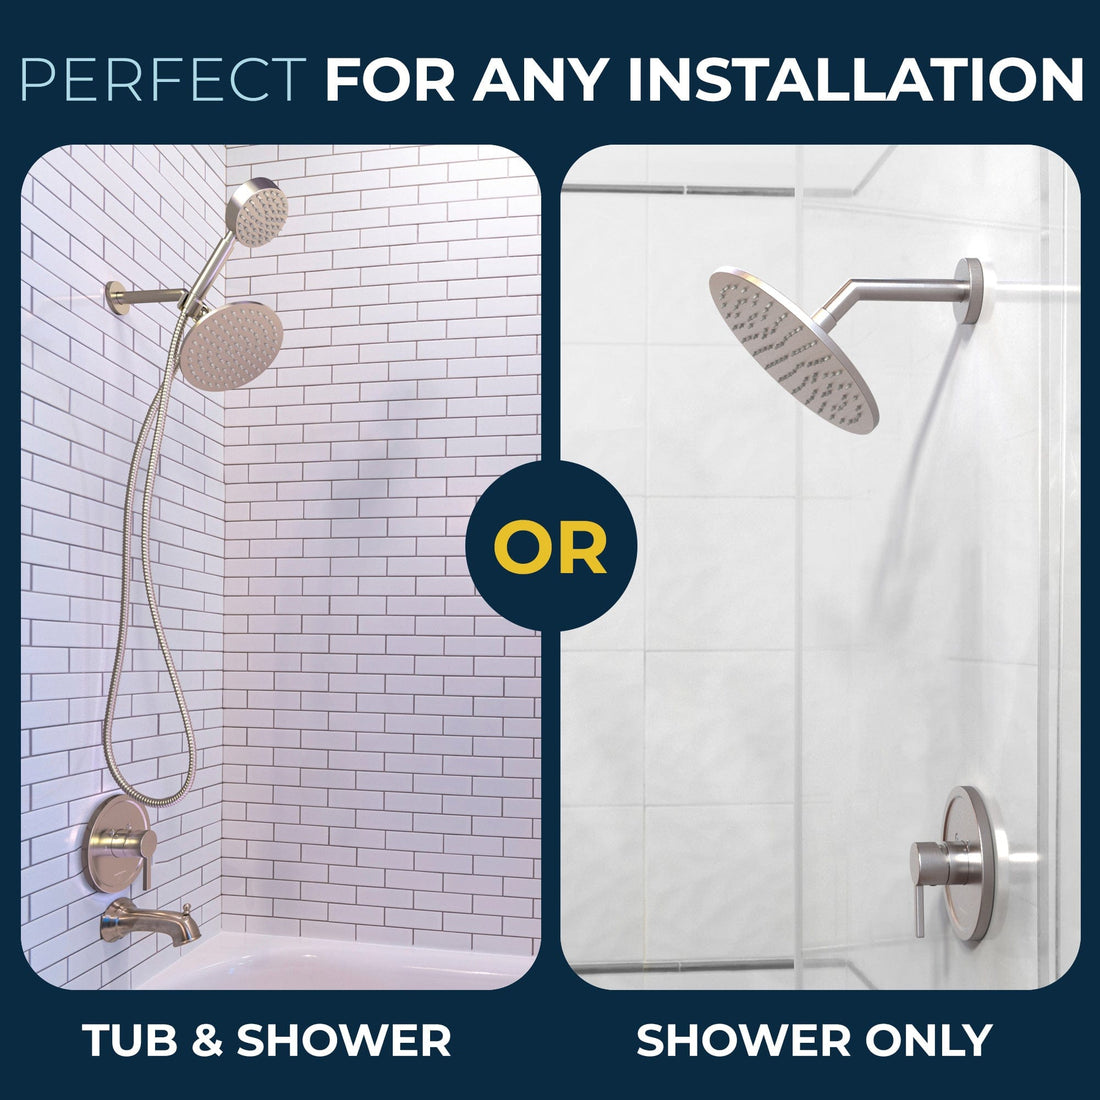 Works for Tub and Shower or Shower Only - All Metal 1-Handle Tub and Shower Valve with Trim Kit Brushed Nickel - The Shower Head Store